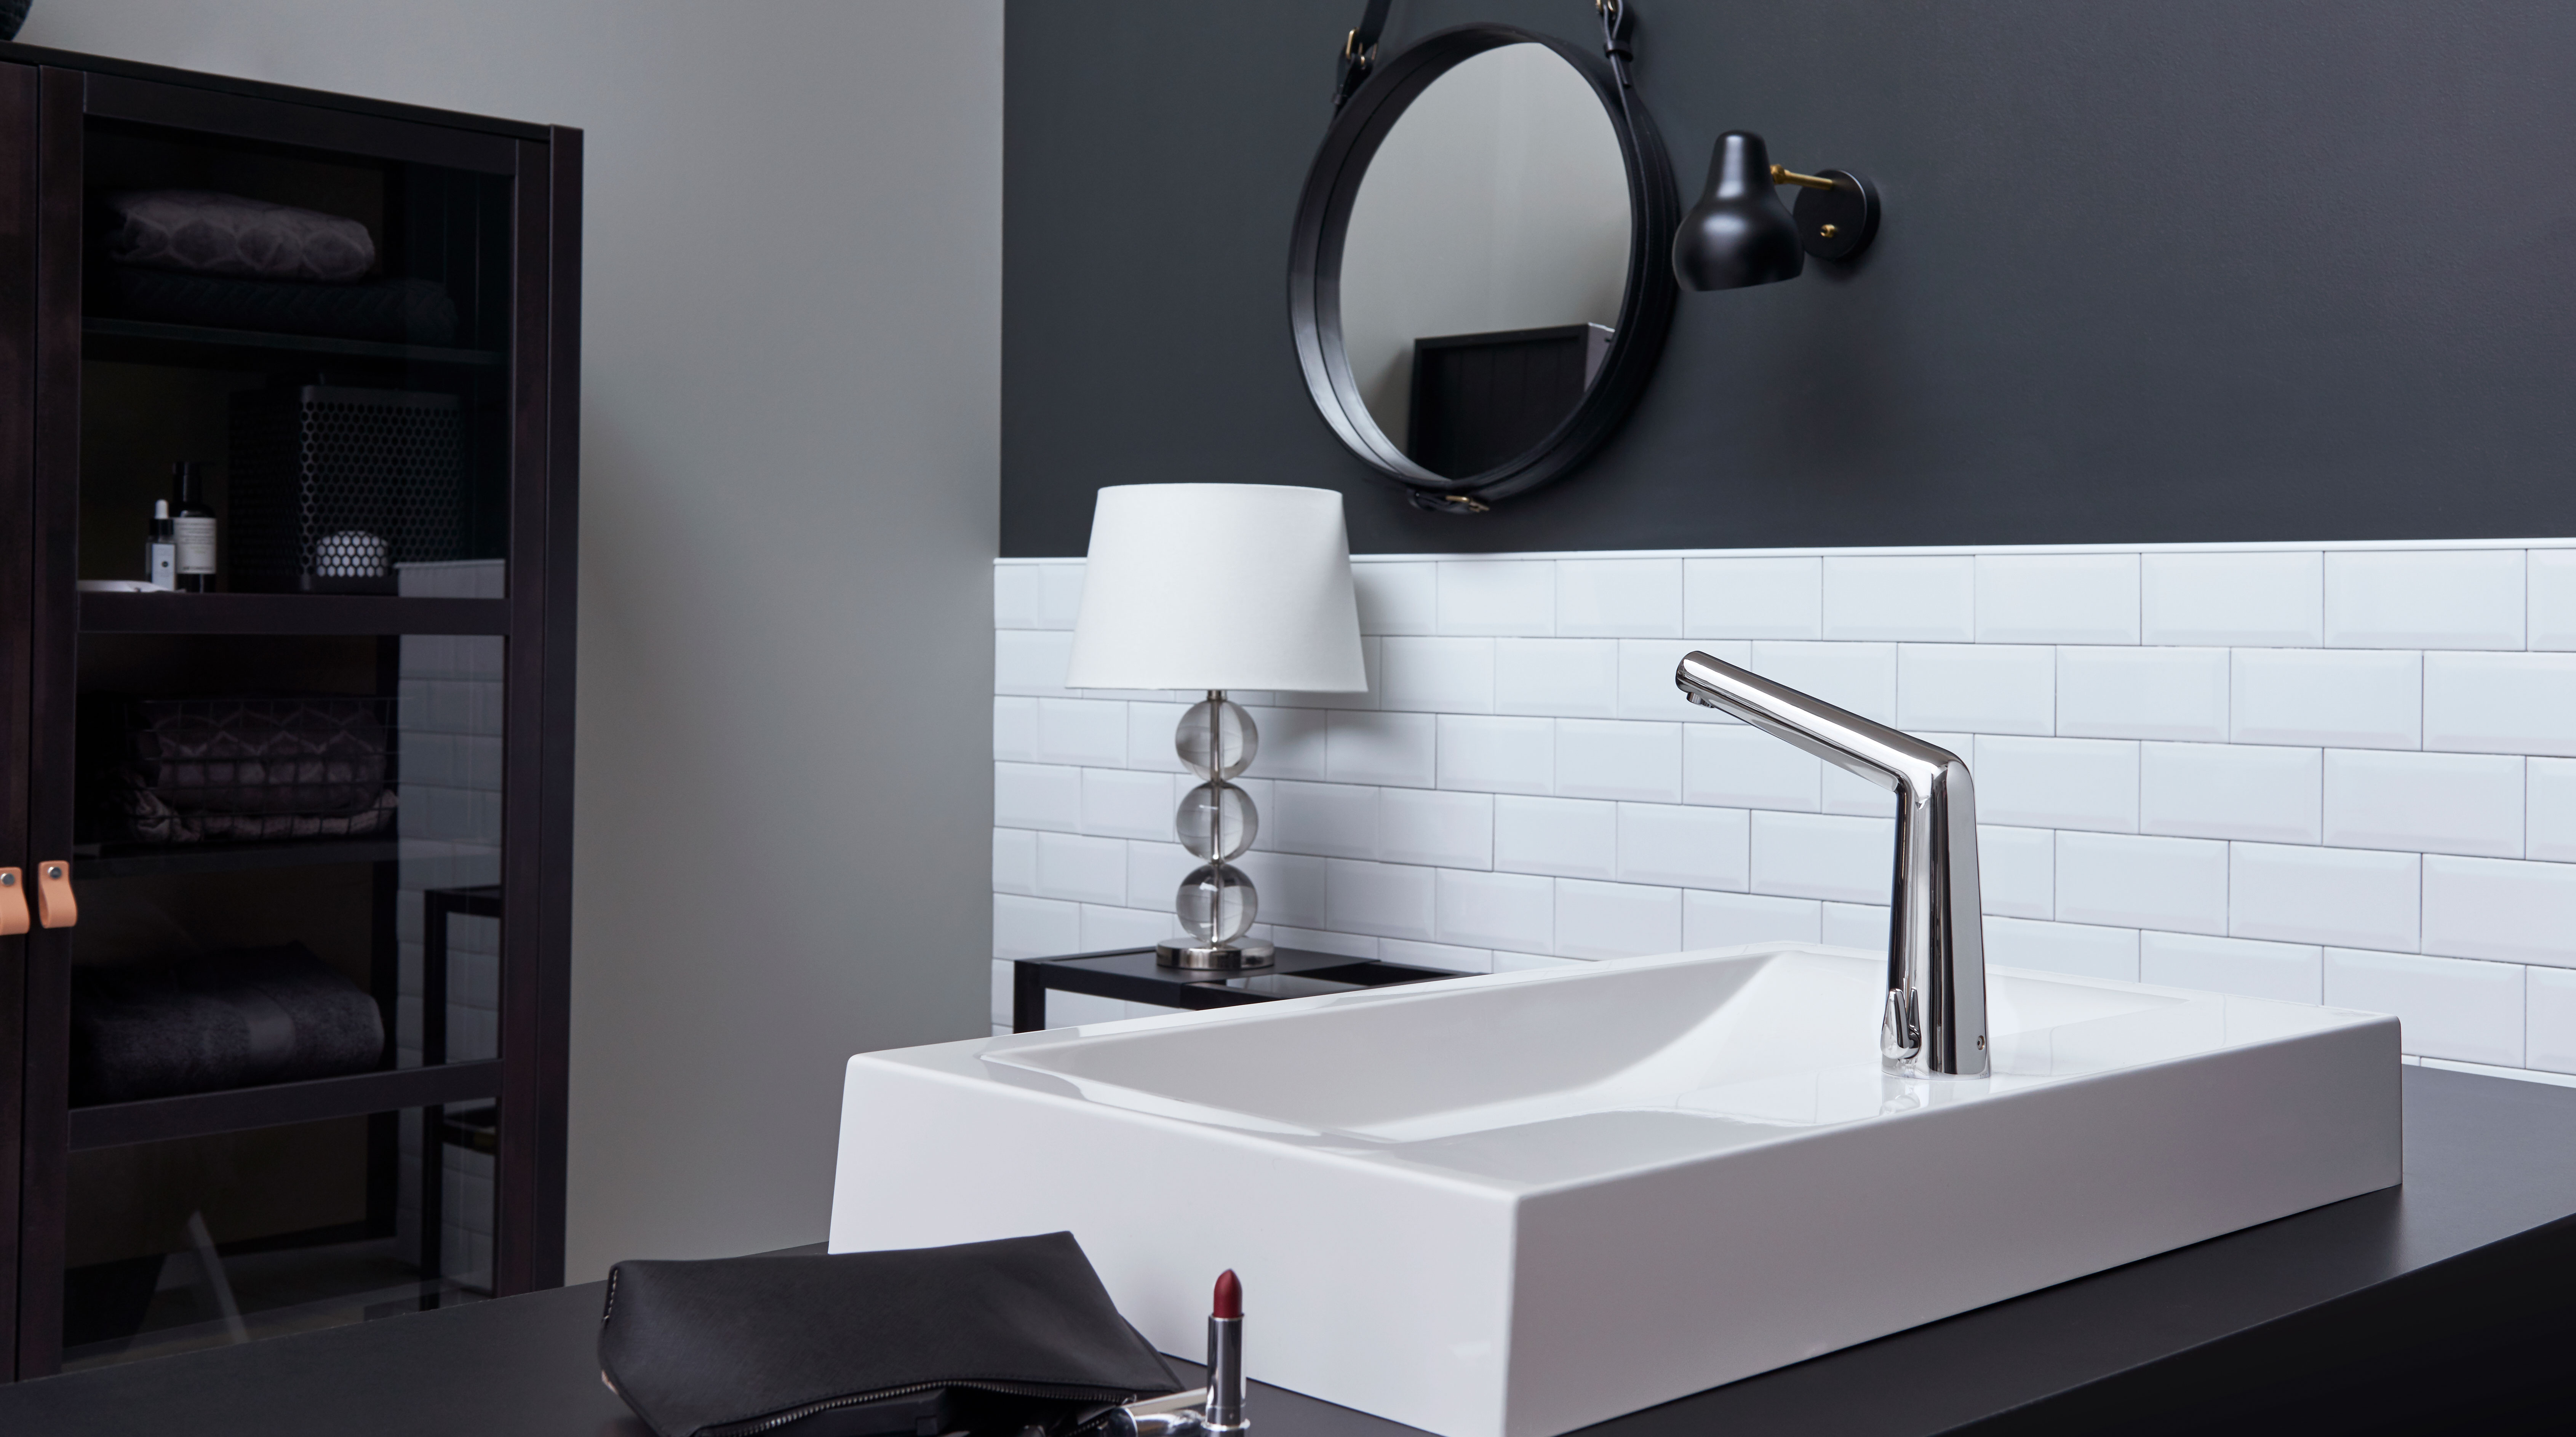 The elegantly shaped touchless faucets are hygienic and easy-to-use and the number one solution for all ecologically-conscious buildings.